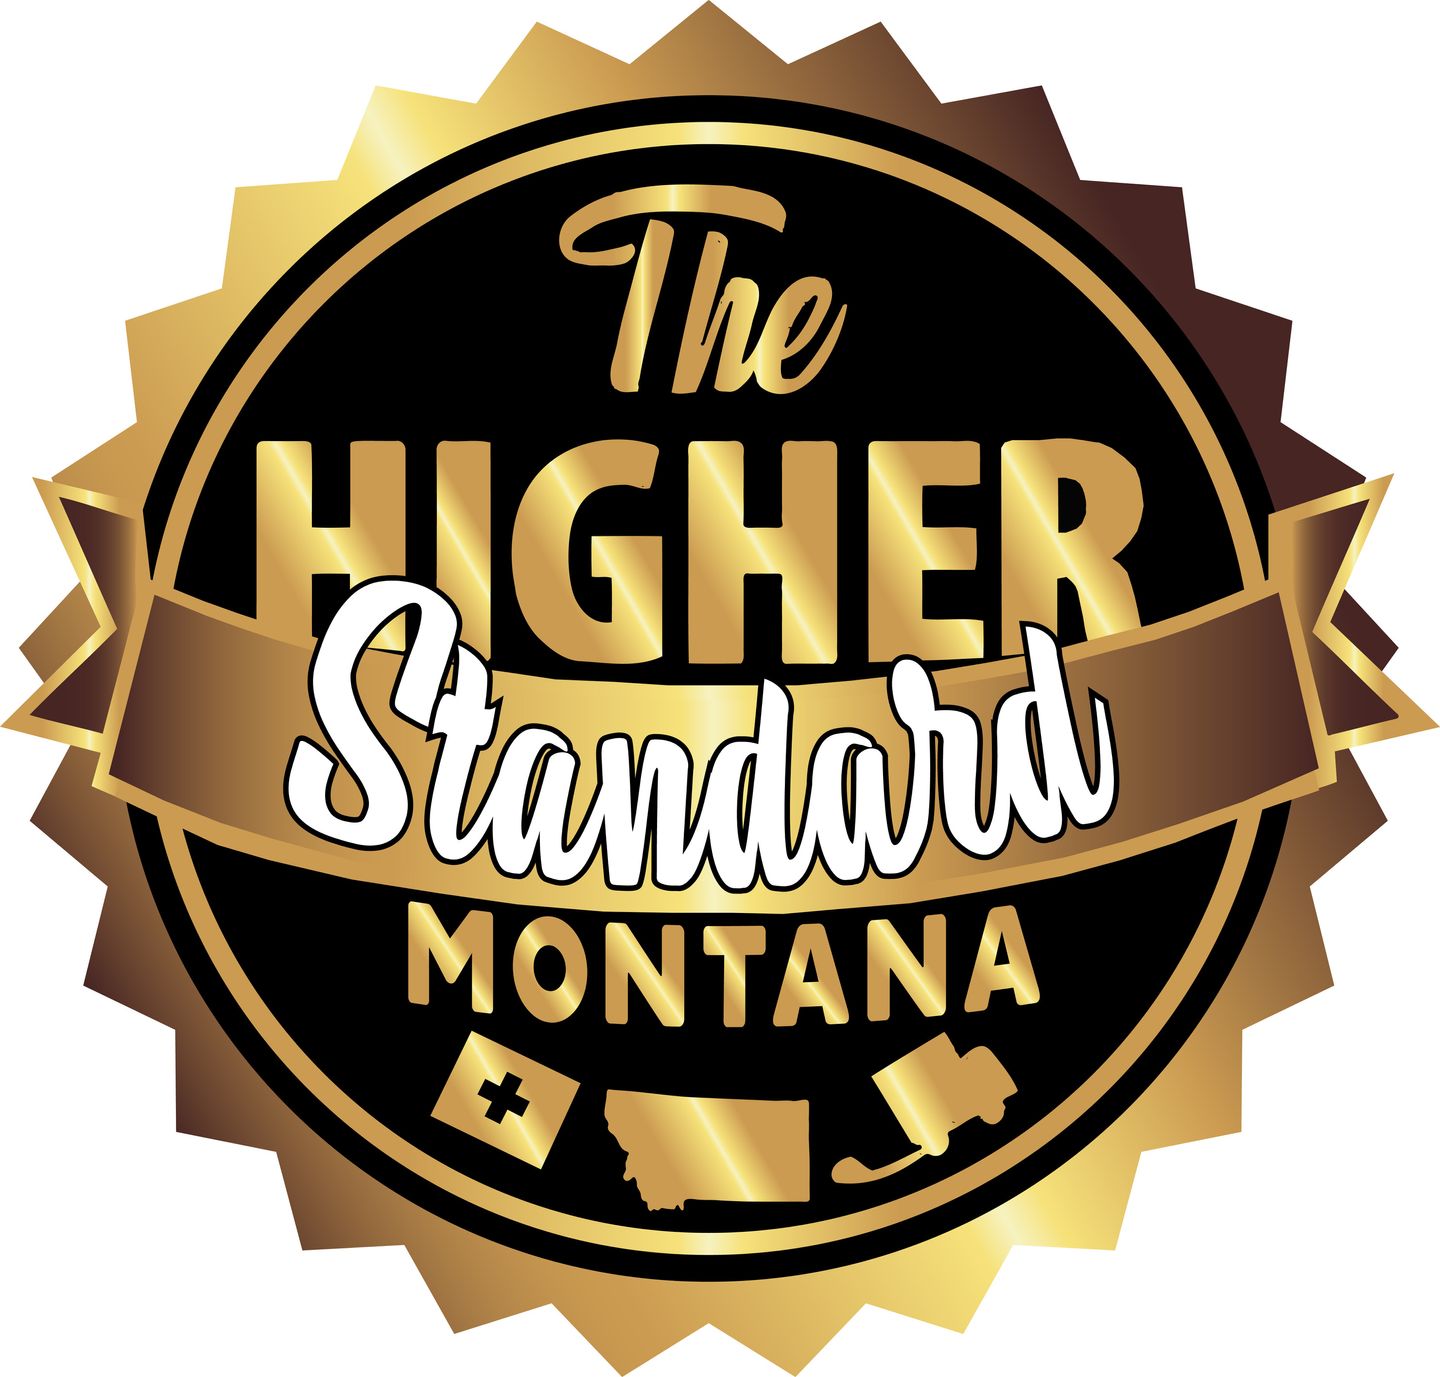 image feature The Higher Standard - Missoula